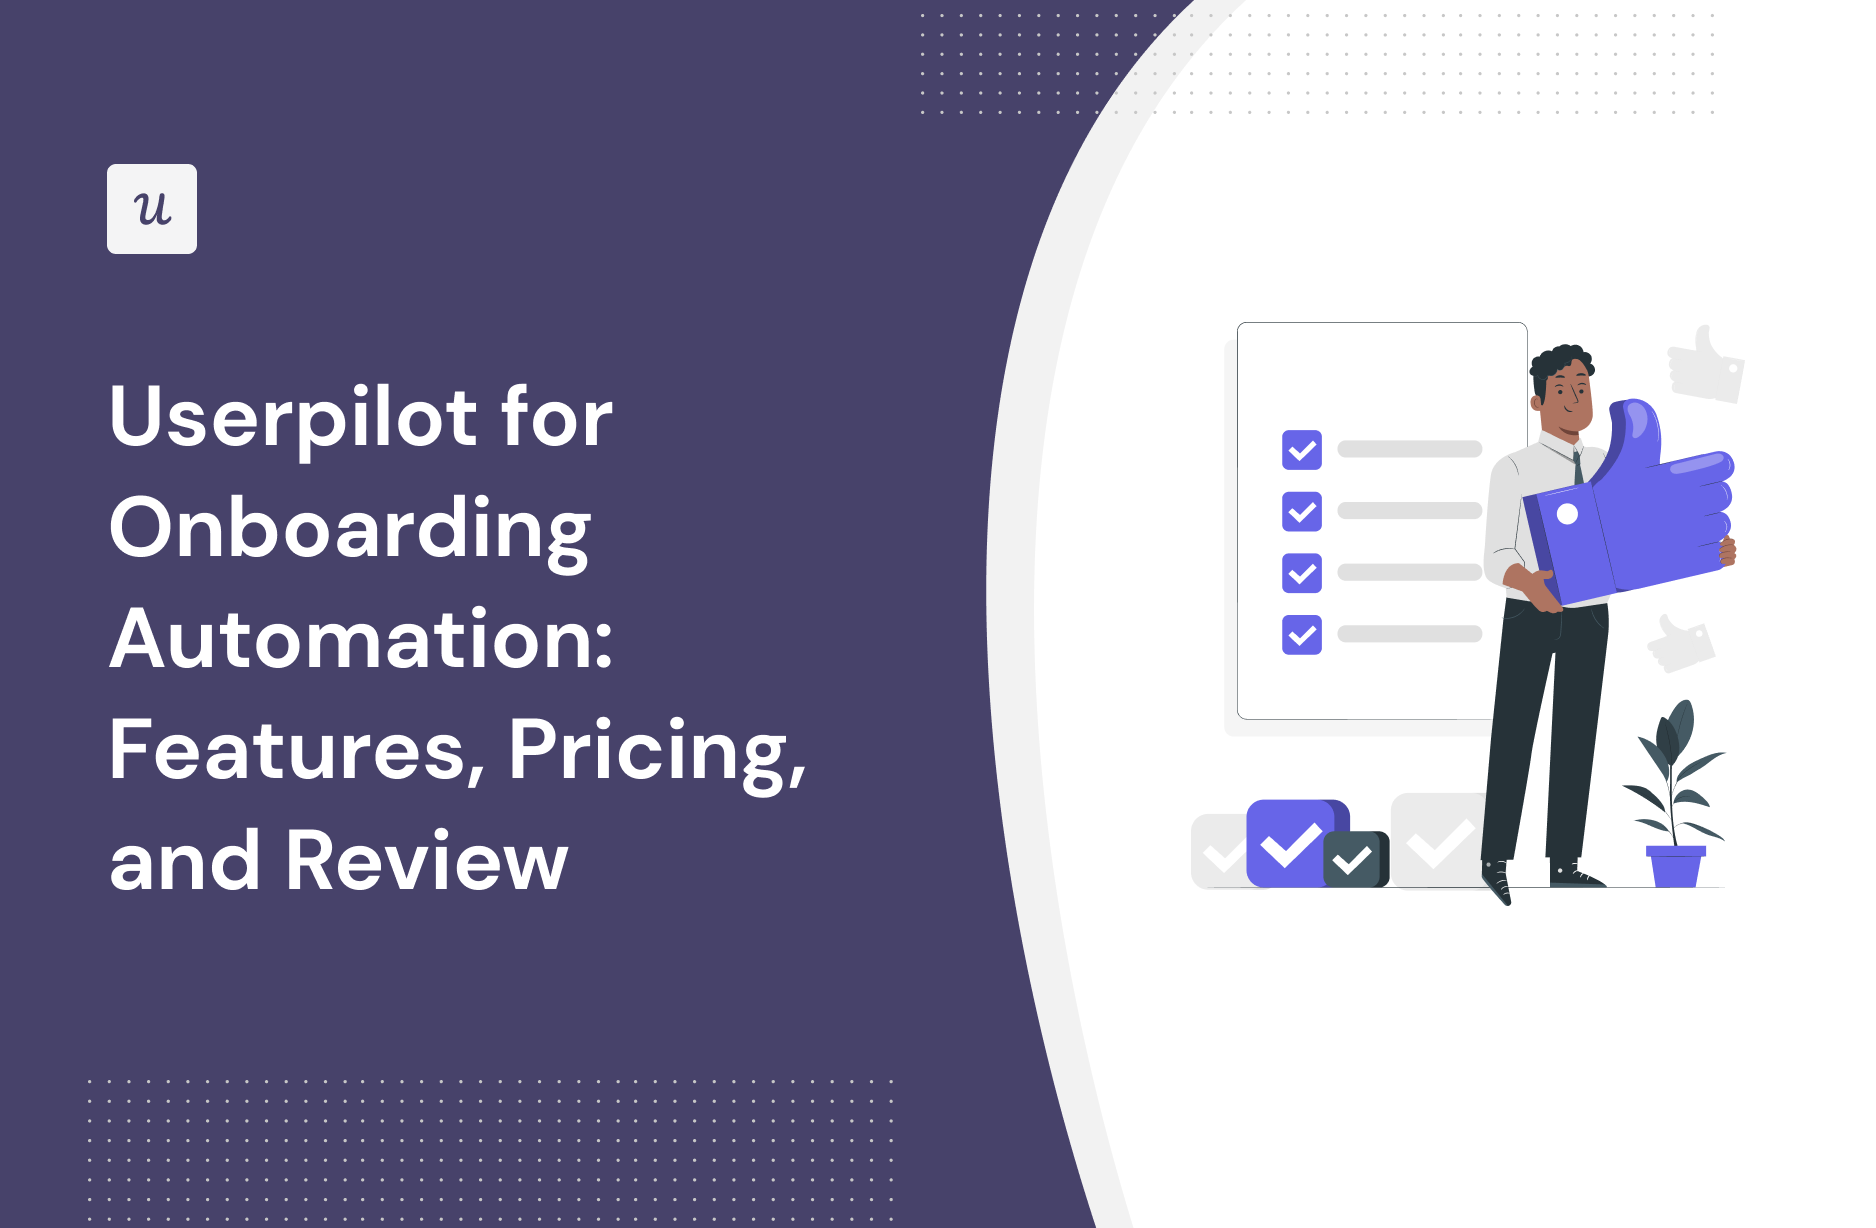 Userpilot for Onboarding Automation: Features, Pricing, and Review